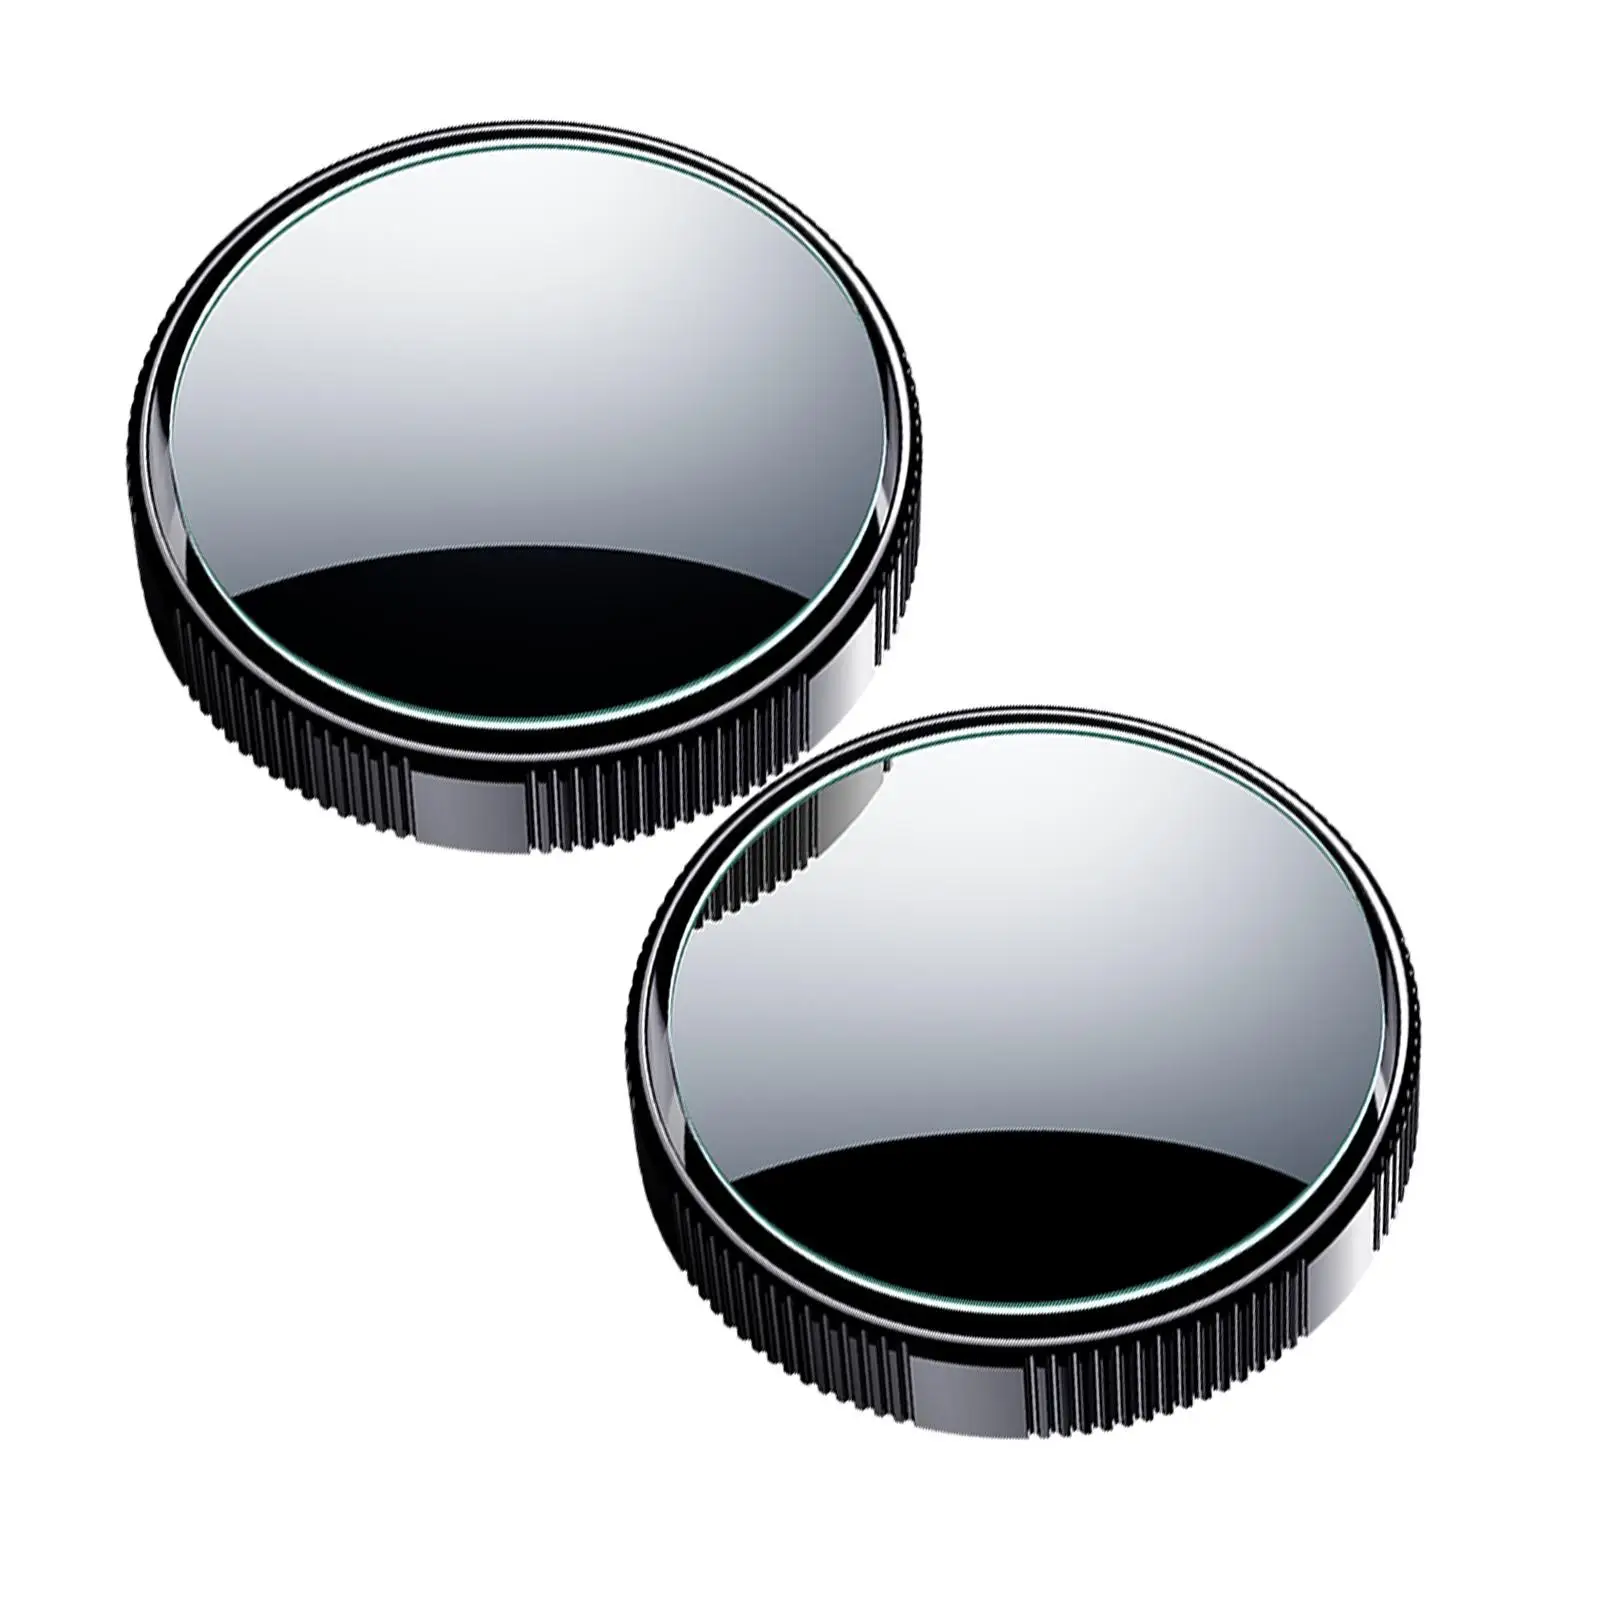 2 Pieces Round Blind Spot Mirrors for Cars Motorcycles Accessories